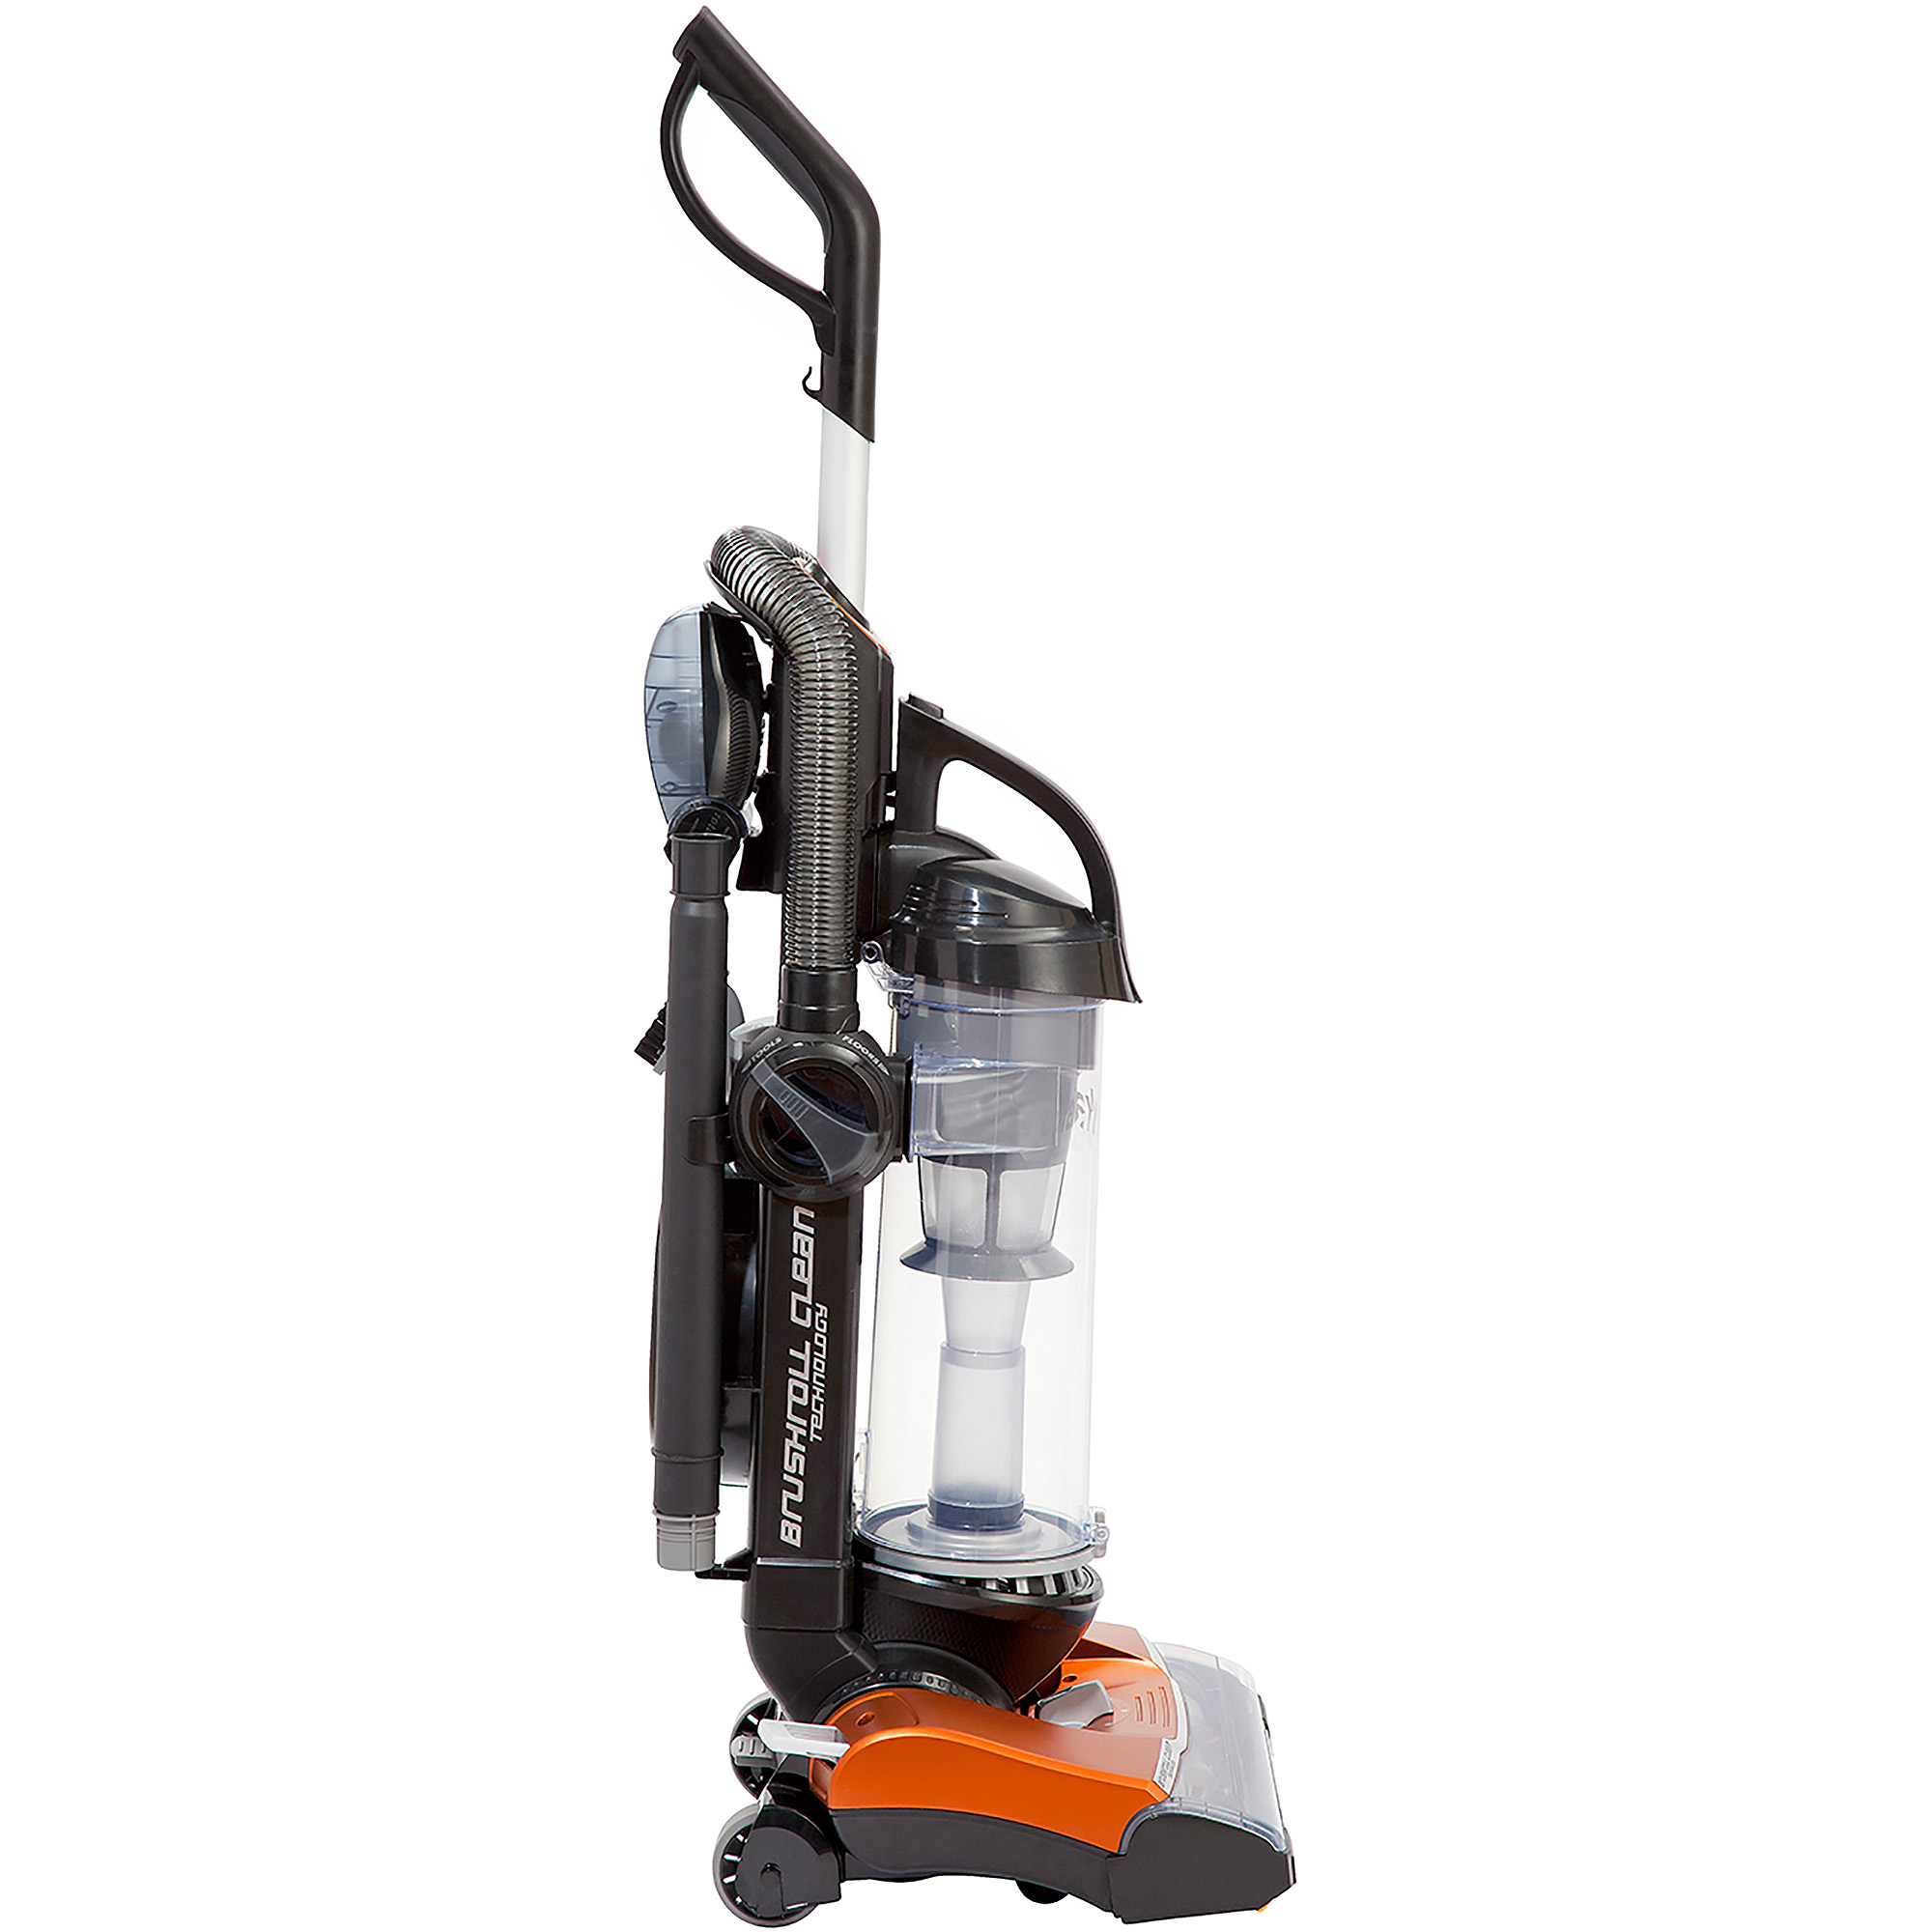 Eureka Brushroll Clean with SuctionSeal Bagless Upright Vacuum, AS3401A - image 5 of 7